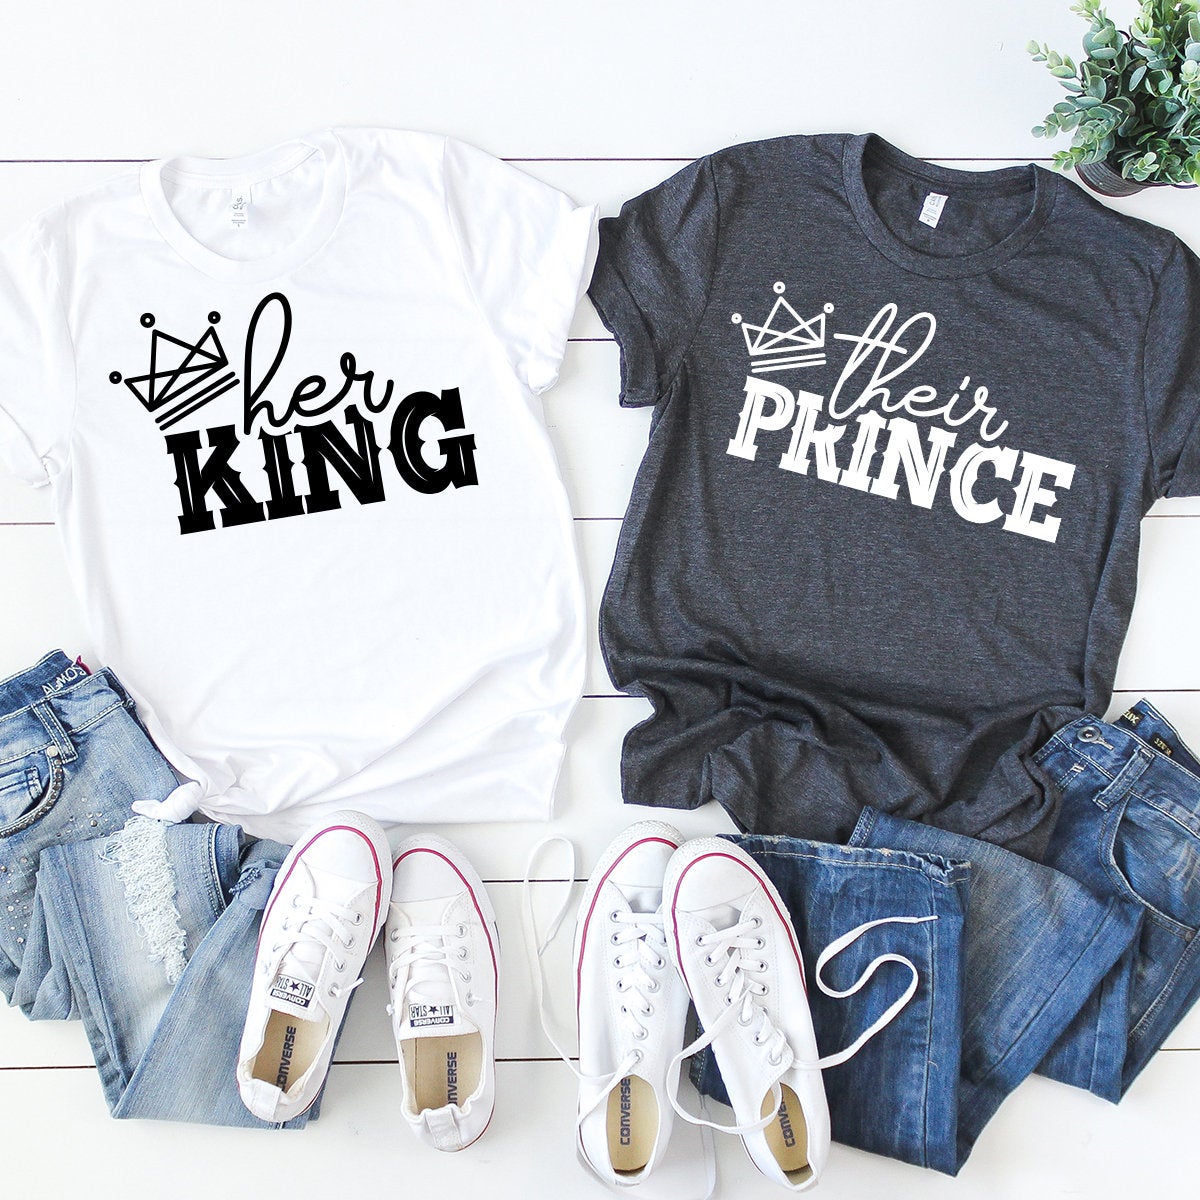 Her King His Queen Shirt, Matching Couples Tee, Wedding Party Shirt, Honeymoon Shirts, Her And His Shirt, Funny Couple Shirt, Girlfriend Tee - Fastdeliverytees.com